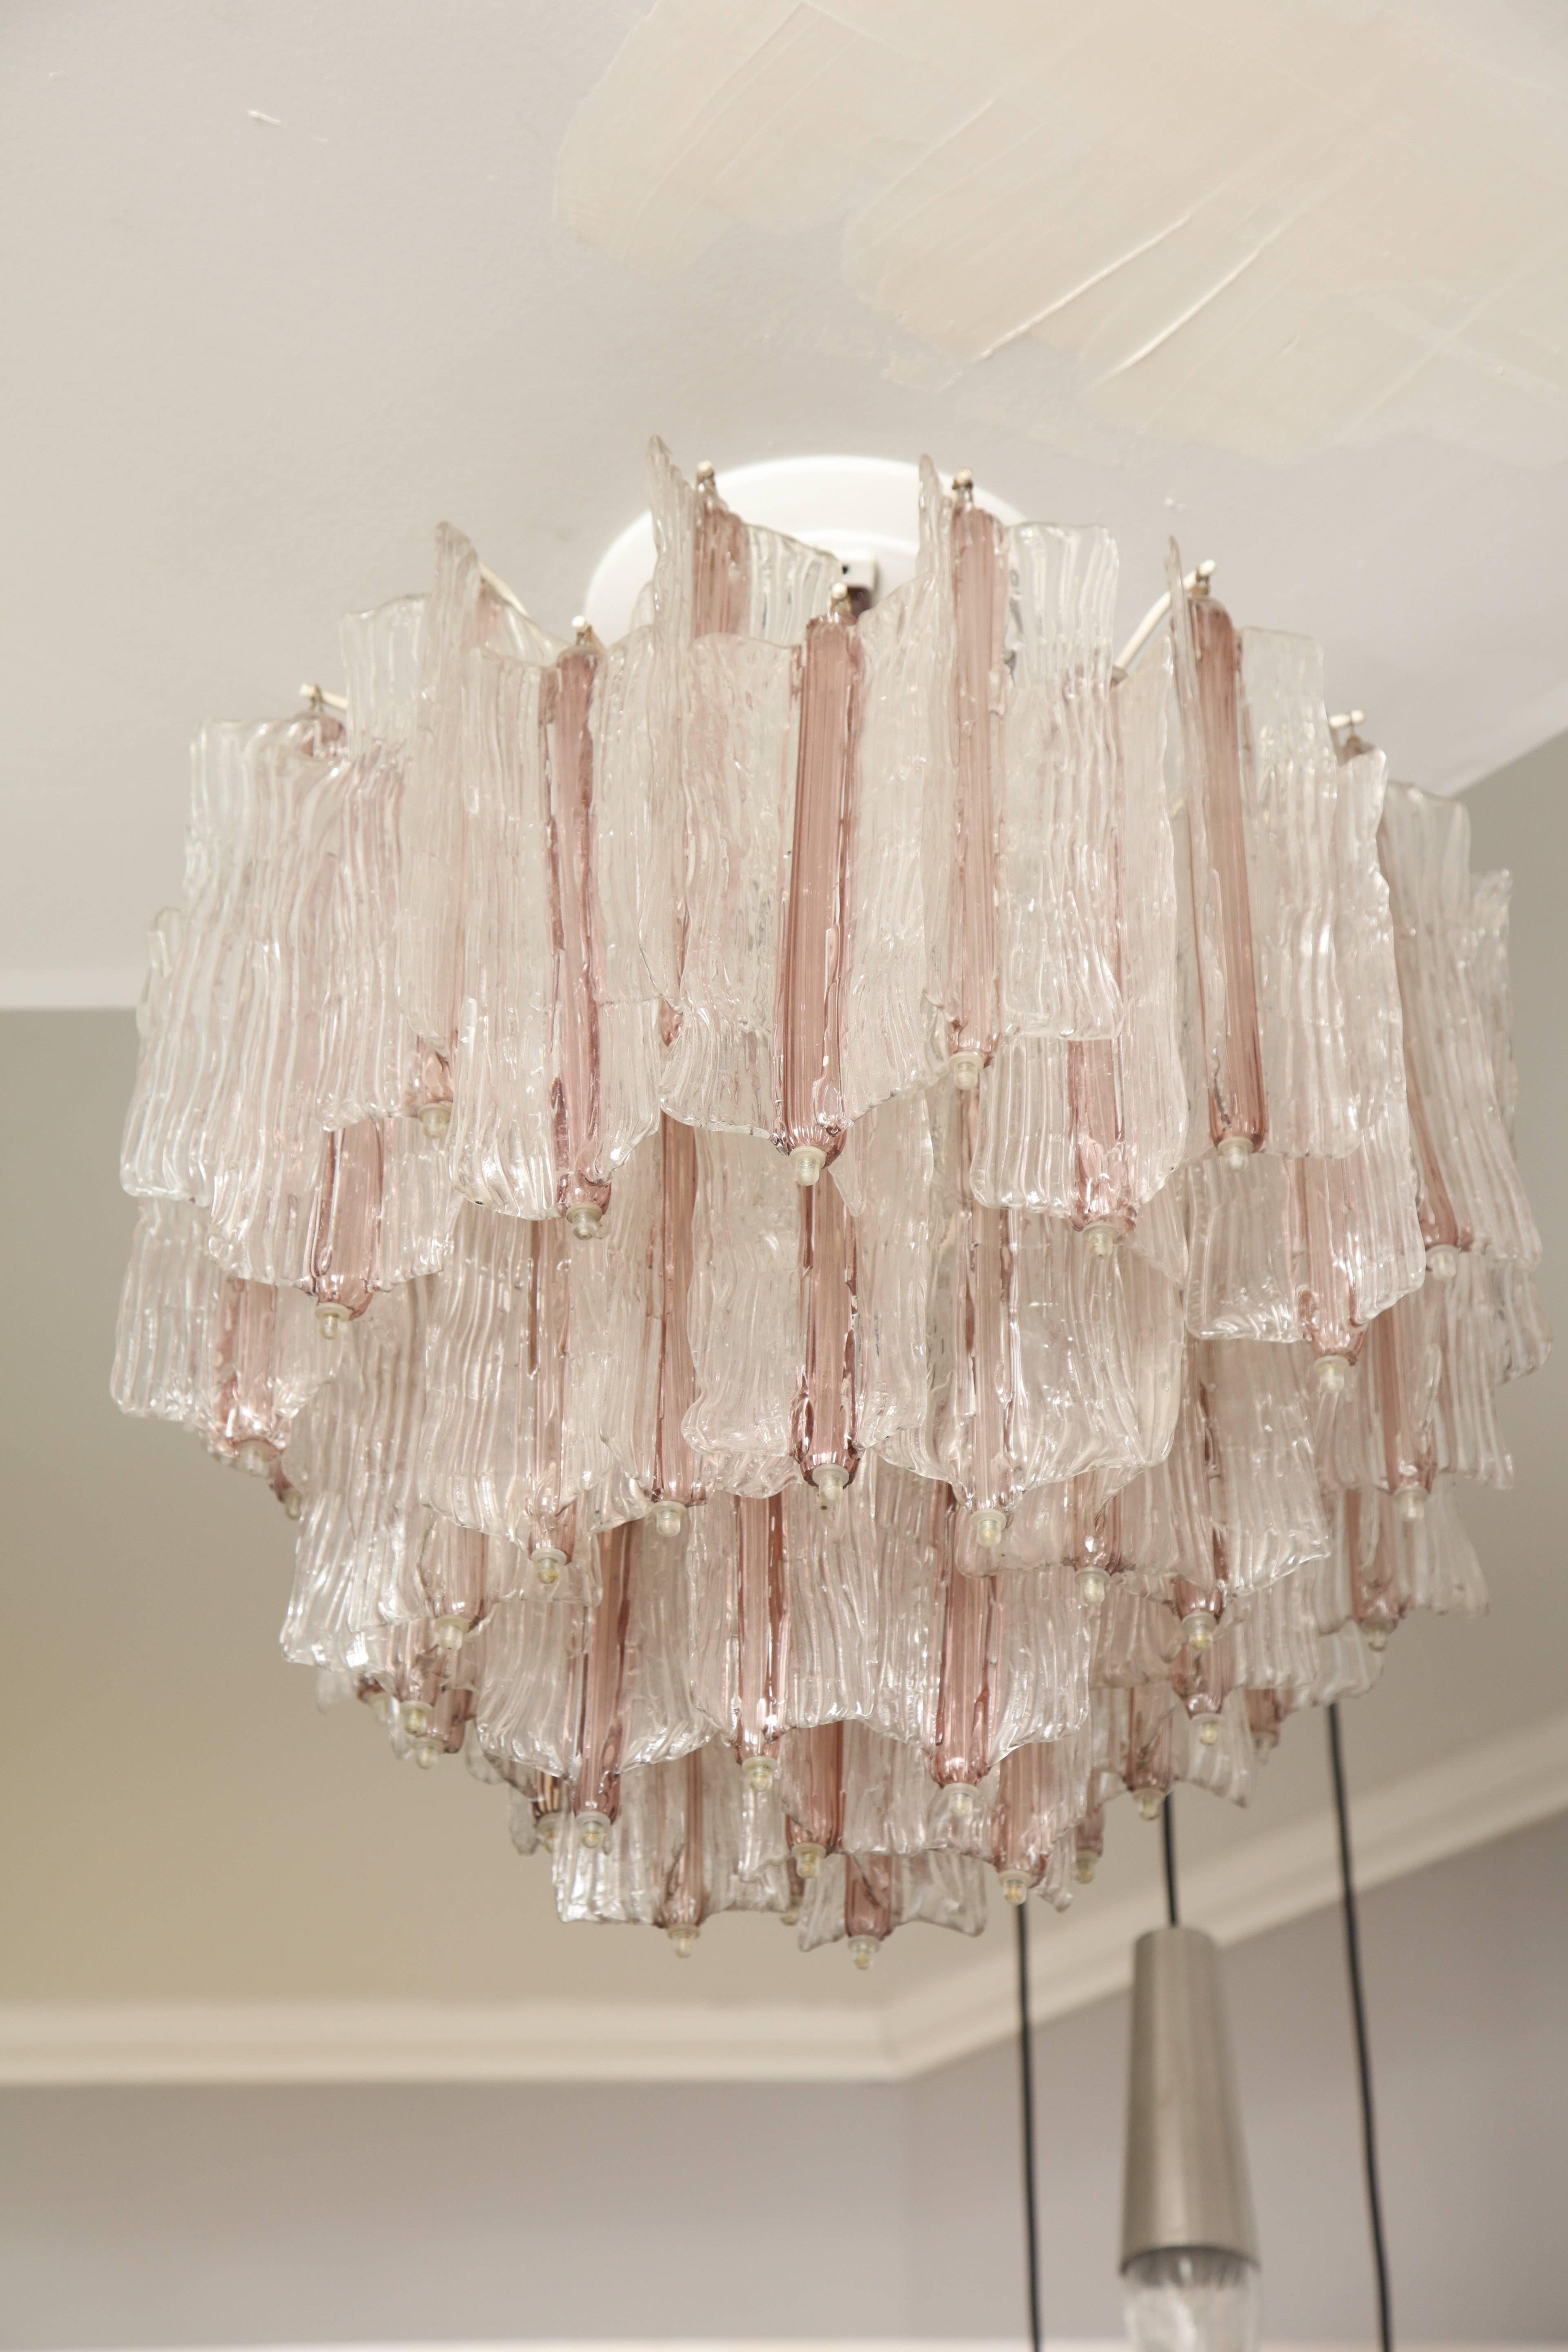 Vintage amethyst and clear Murano glass chandelier by Toni Zuccheri for Venini.